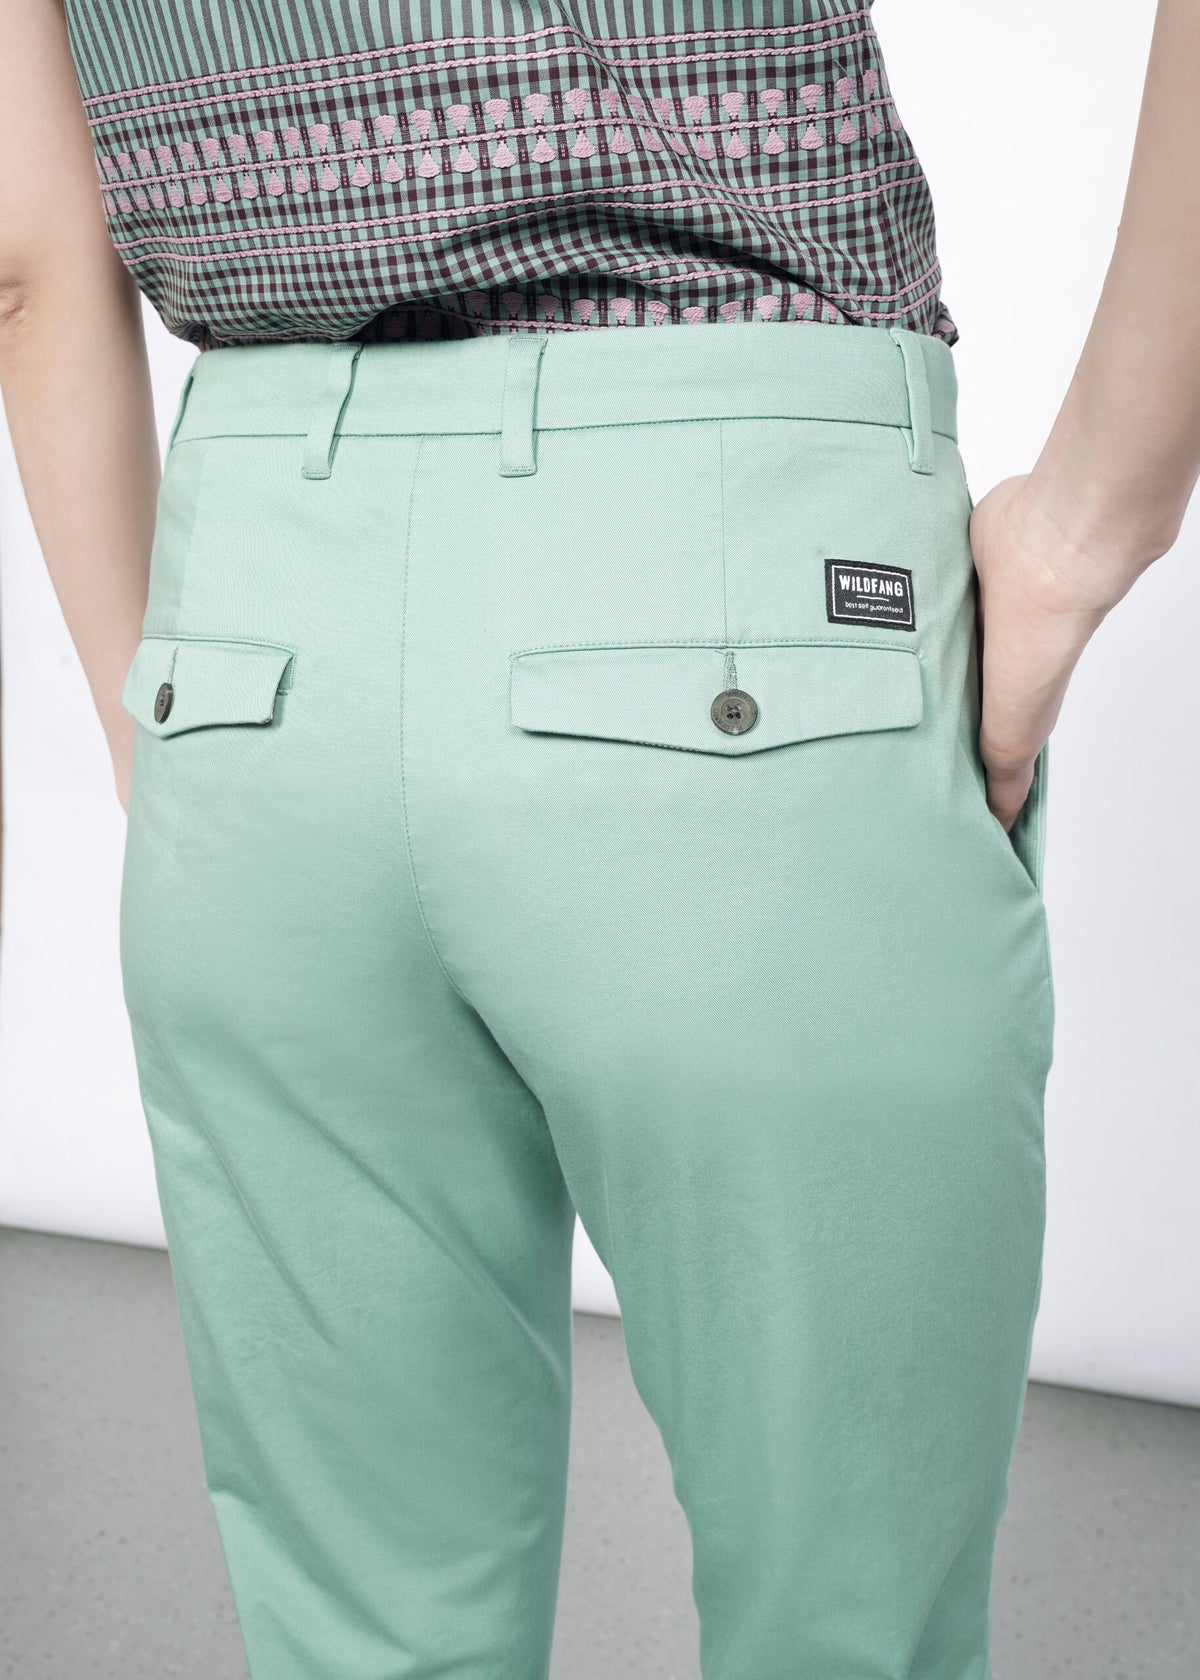 Close-up of Back image of Model wearing the Essential Trouser in Sage in size 4, with the Essential Button Up in Gingham Sage